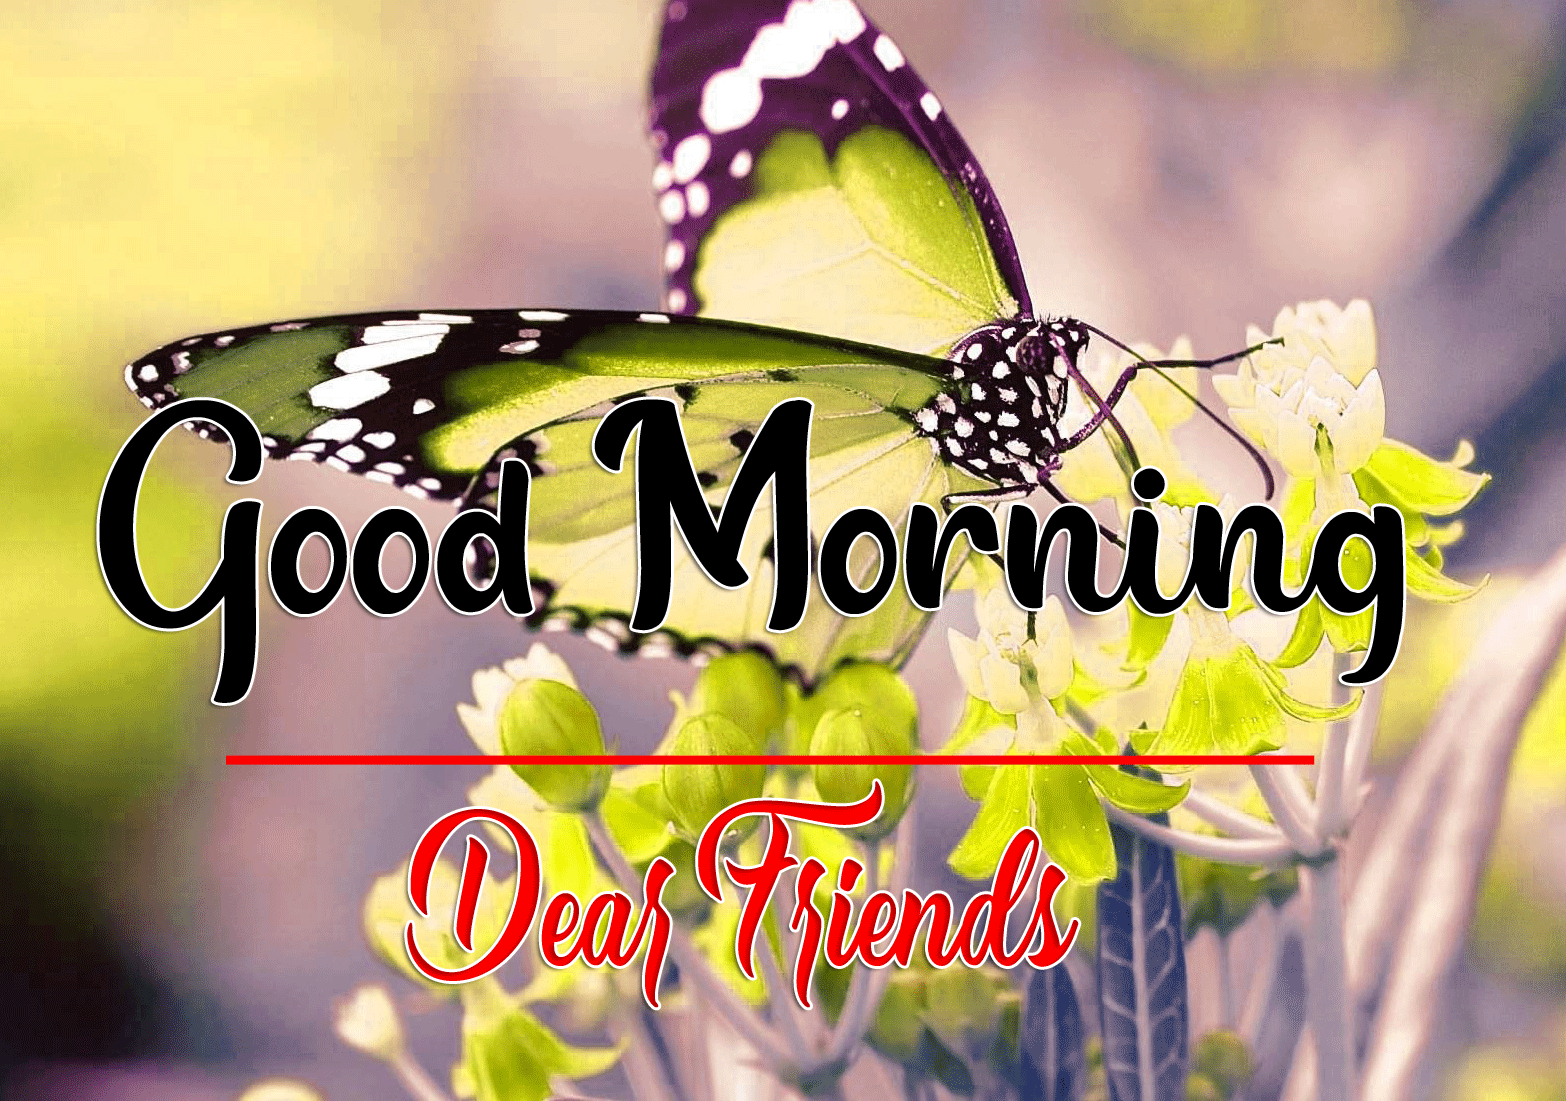 Good Morning Wishes Images HD 1080p 13